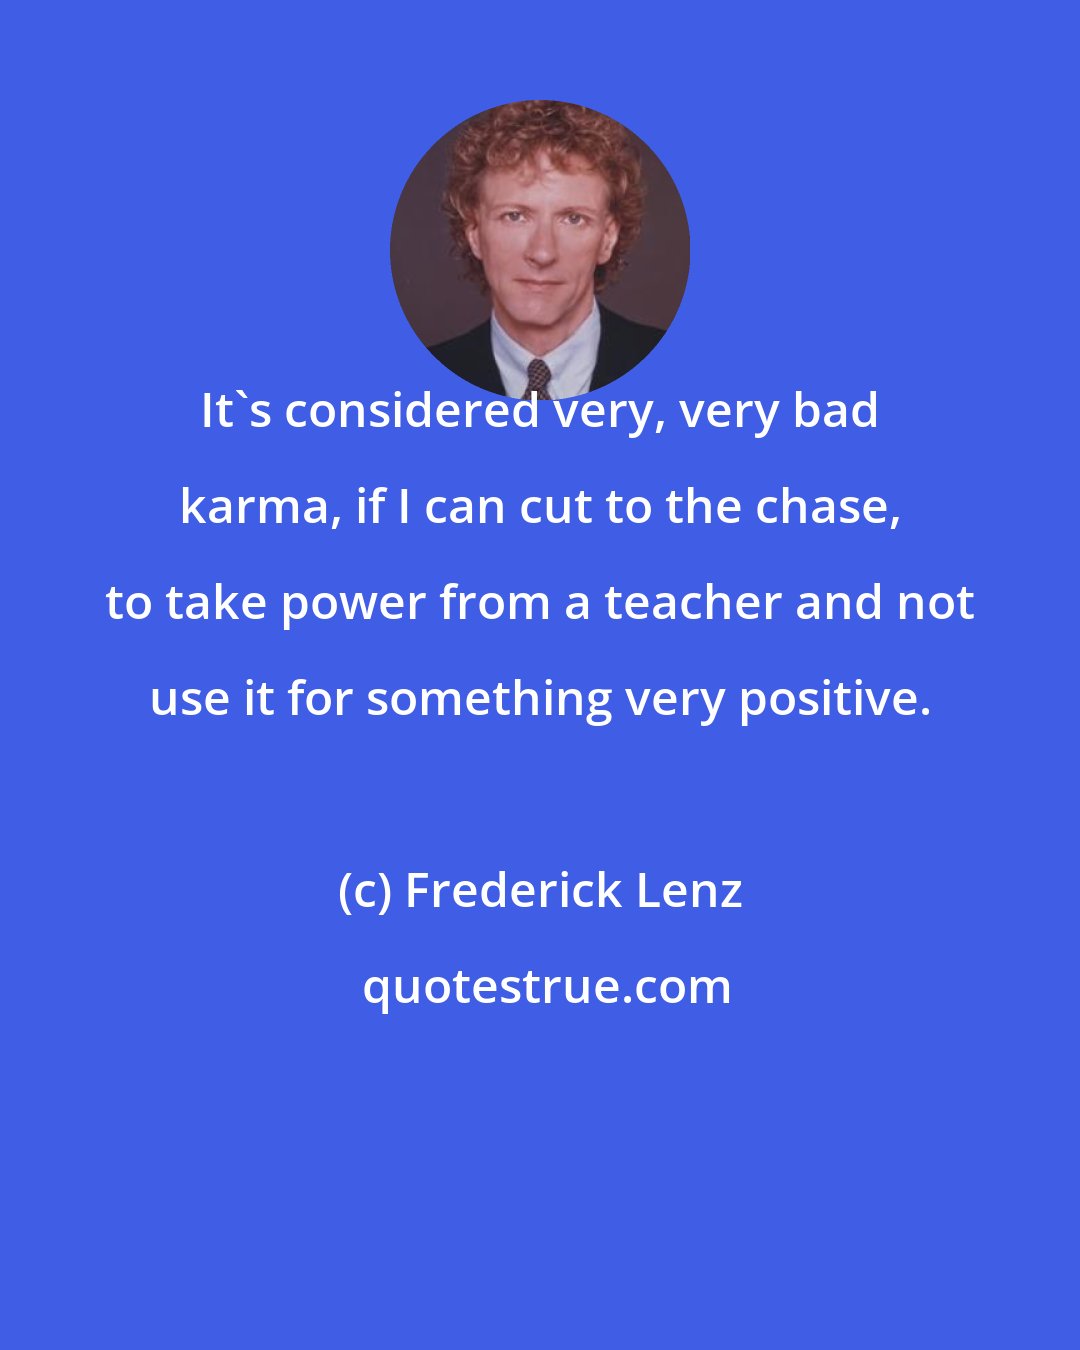 Frederick Lenz: It's considered very, very bad karma, if I can cut to the chase, to take power from a teacher and not use it for something very positive.